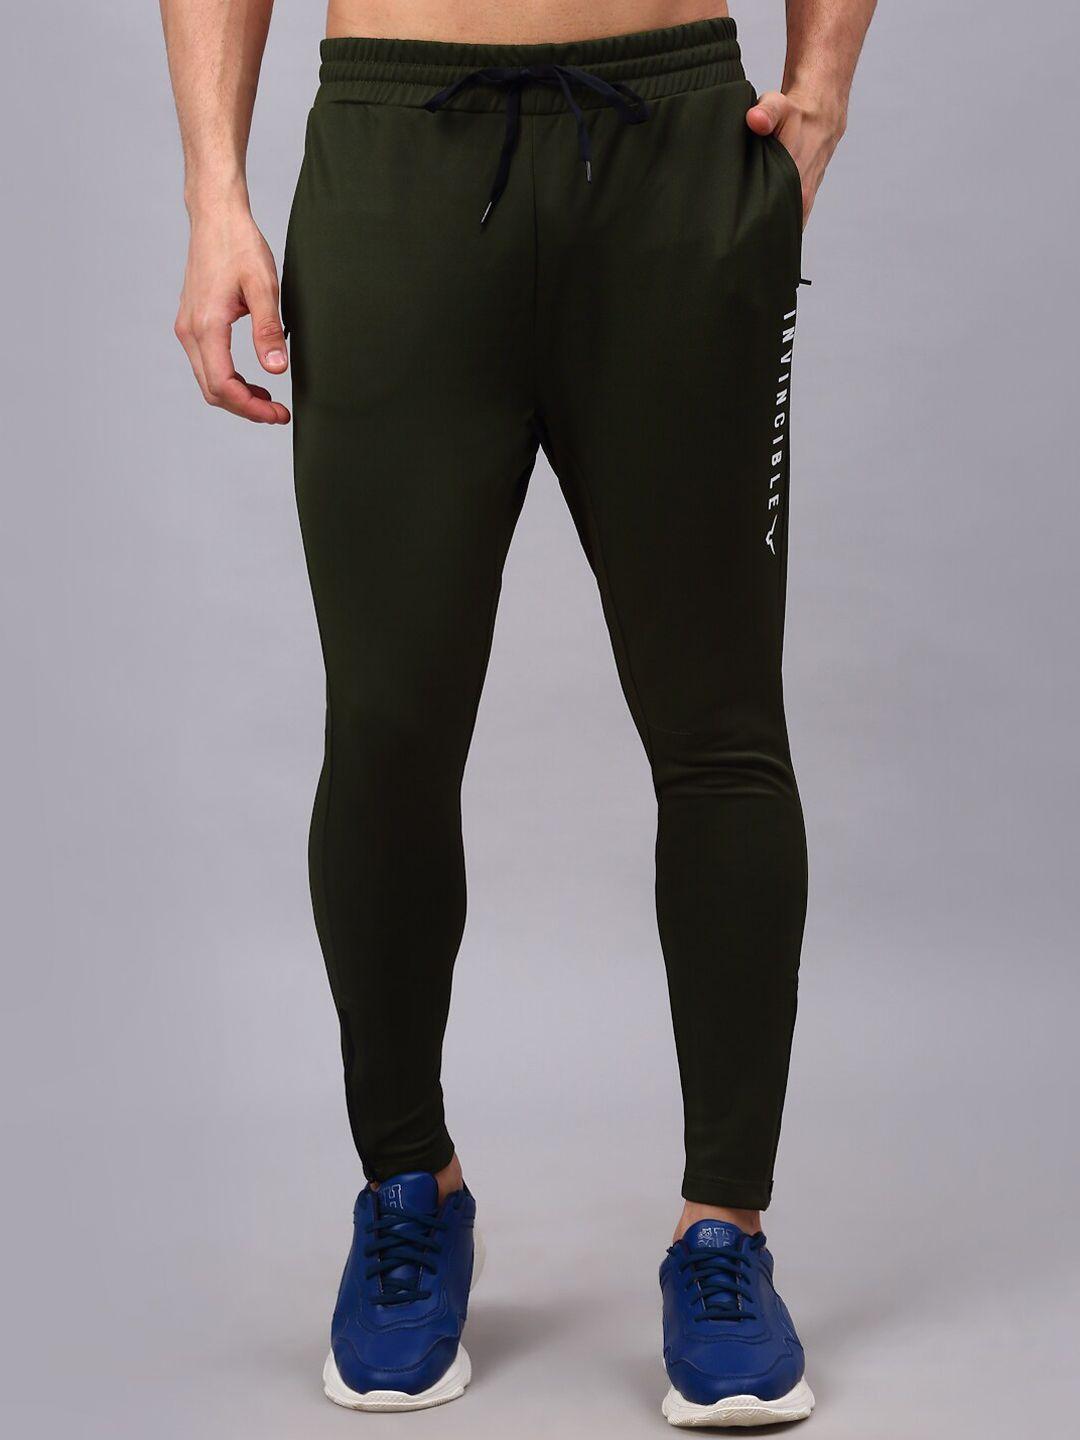 invincible-men-olive-solid-rapid-dry-track-pant